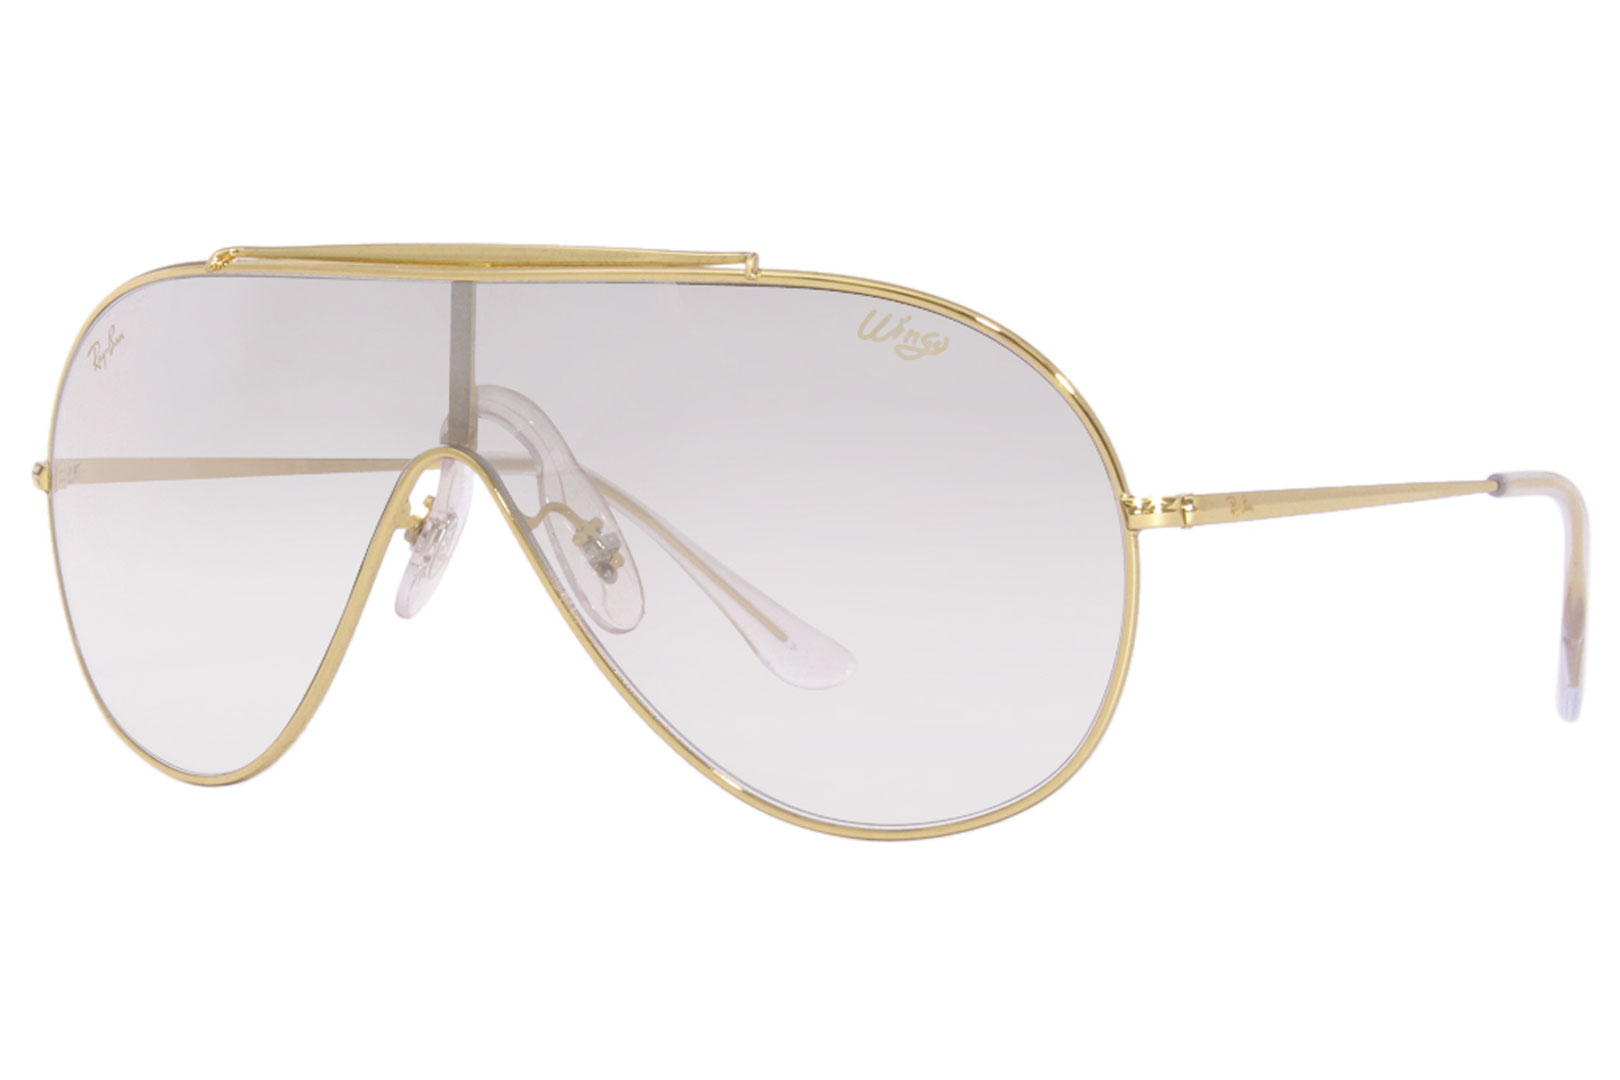 Ray Ban Wings RB3597 9196/6I Sunglasses Men's Gold/Clear/Silver 33-133-140  